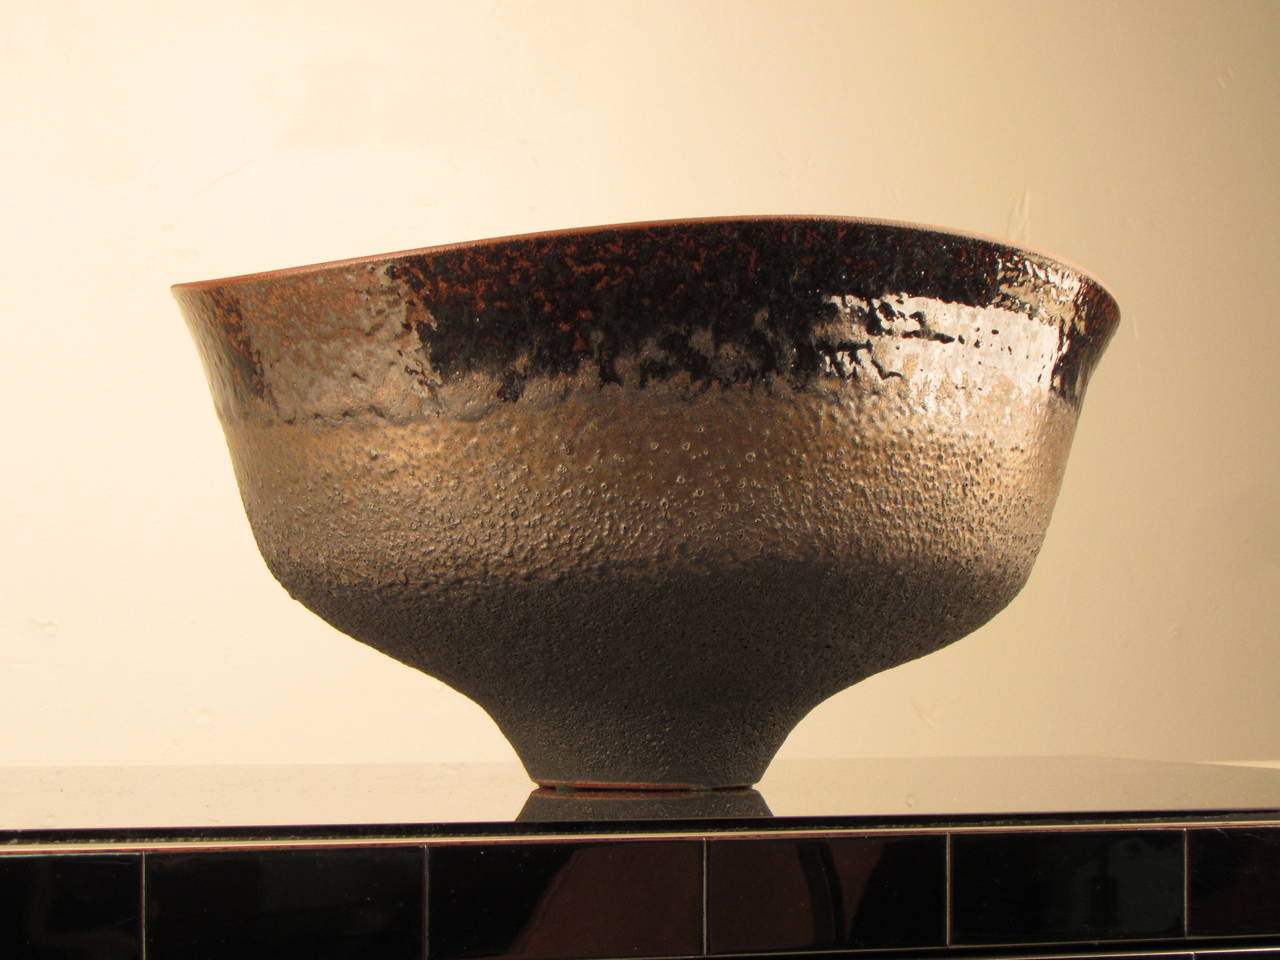 Modern Statuesque Footed Vessel by Studio Potter, Jeremy Briddell